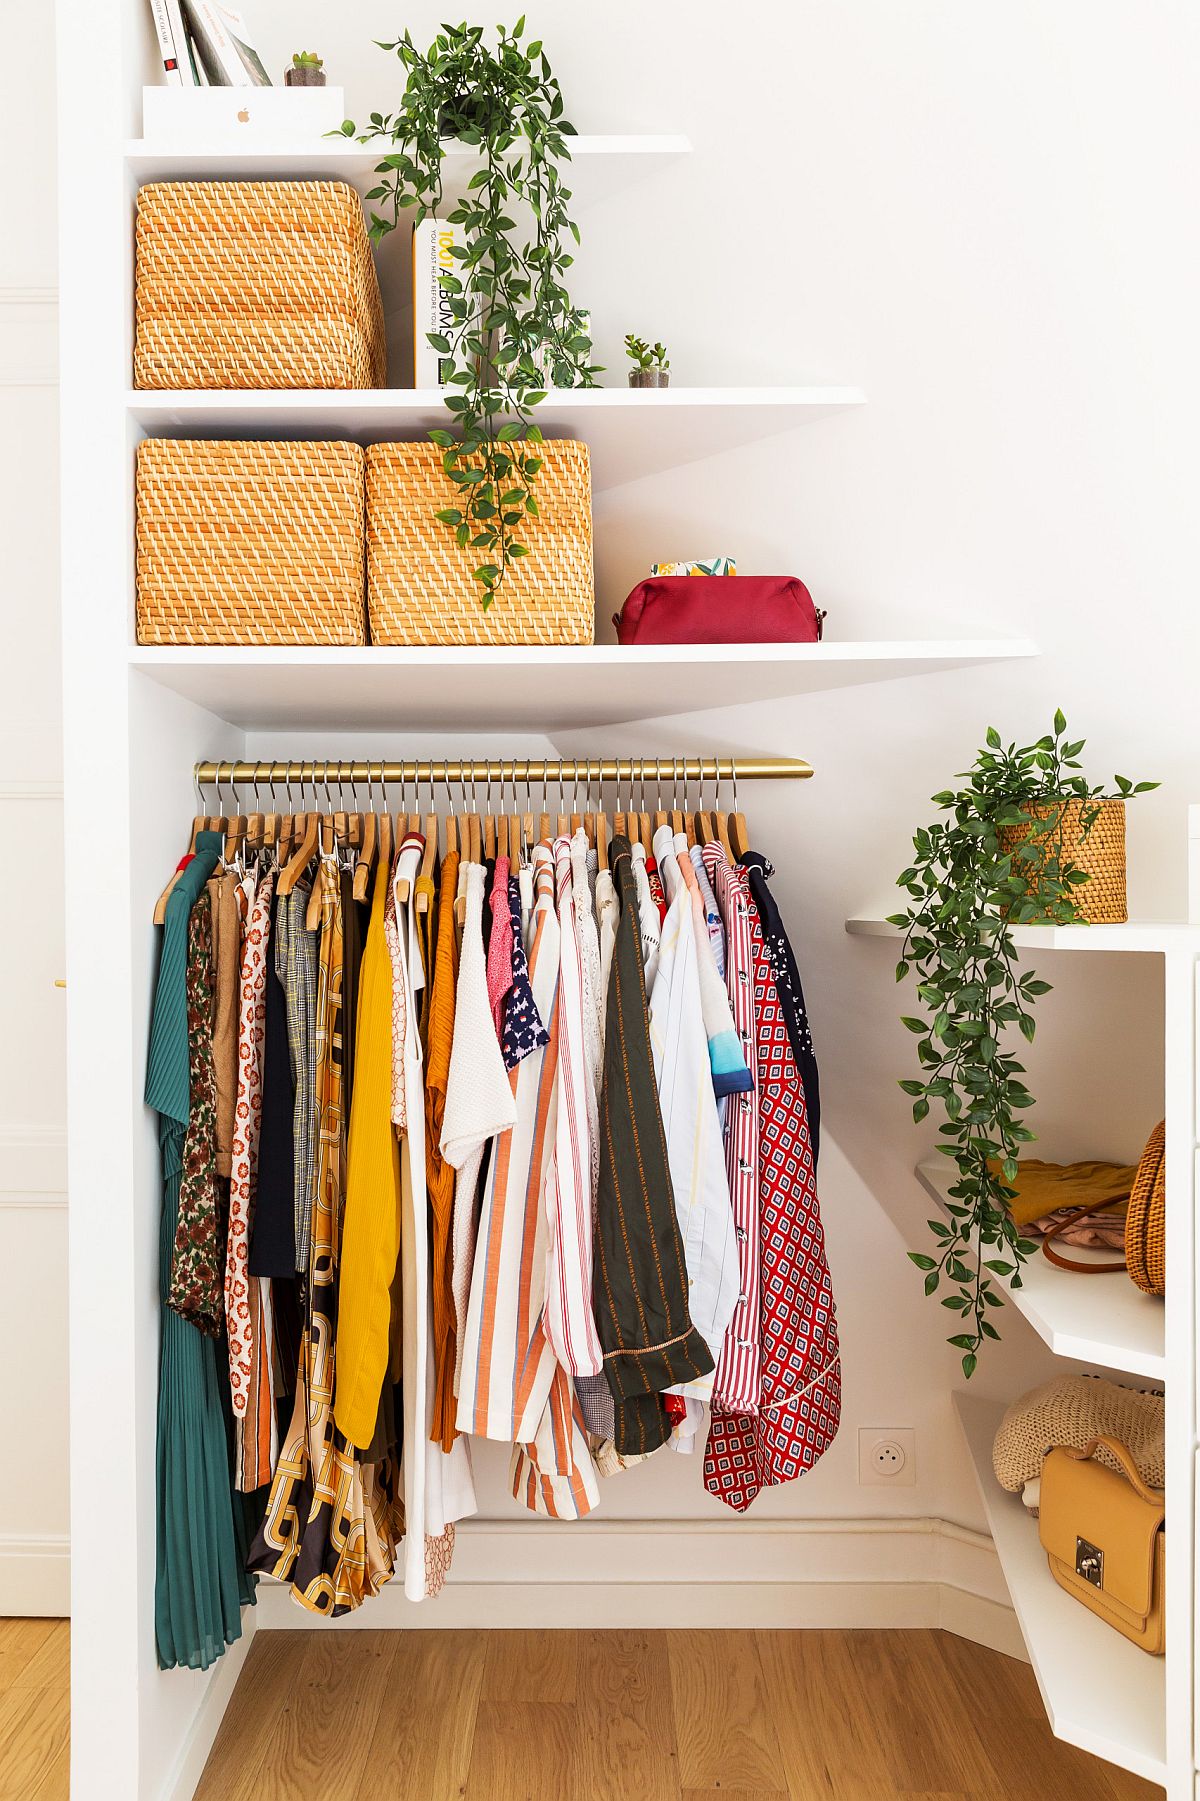 18 Small Apartment Closet Ideas that Save Space with Innovative Design